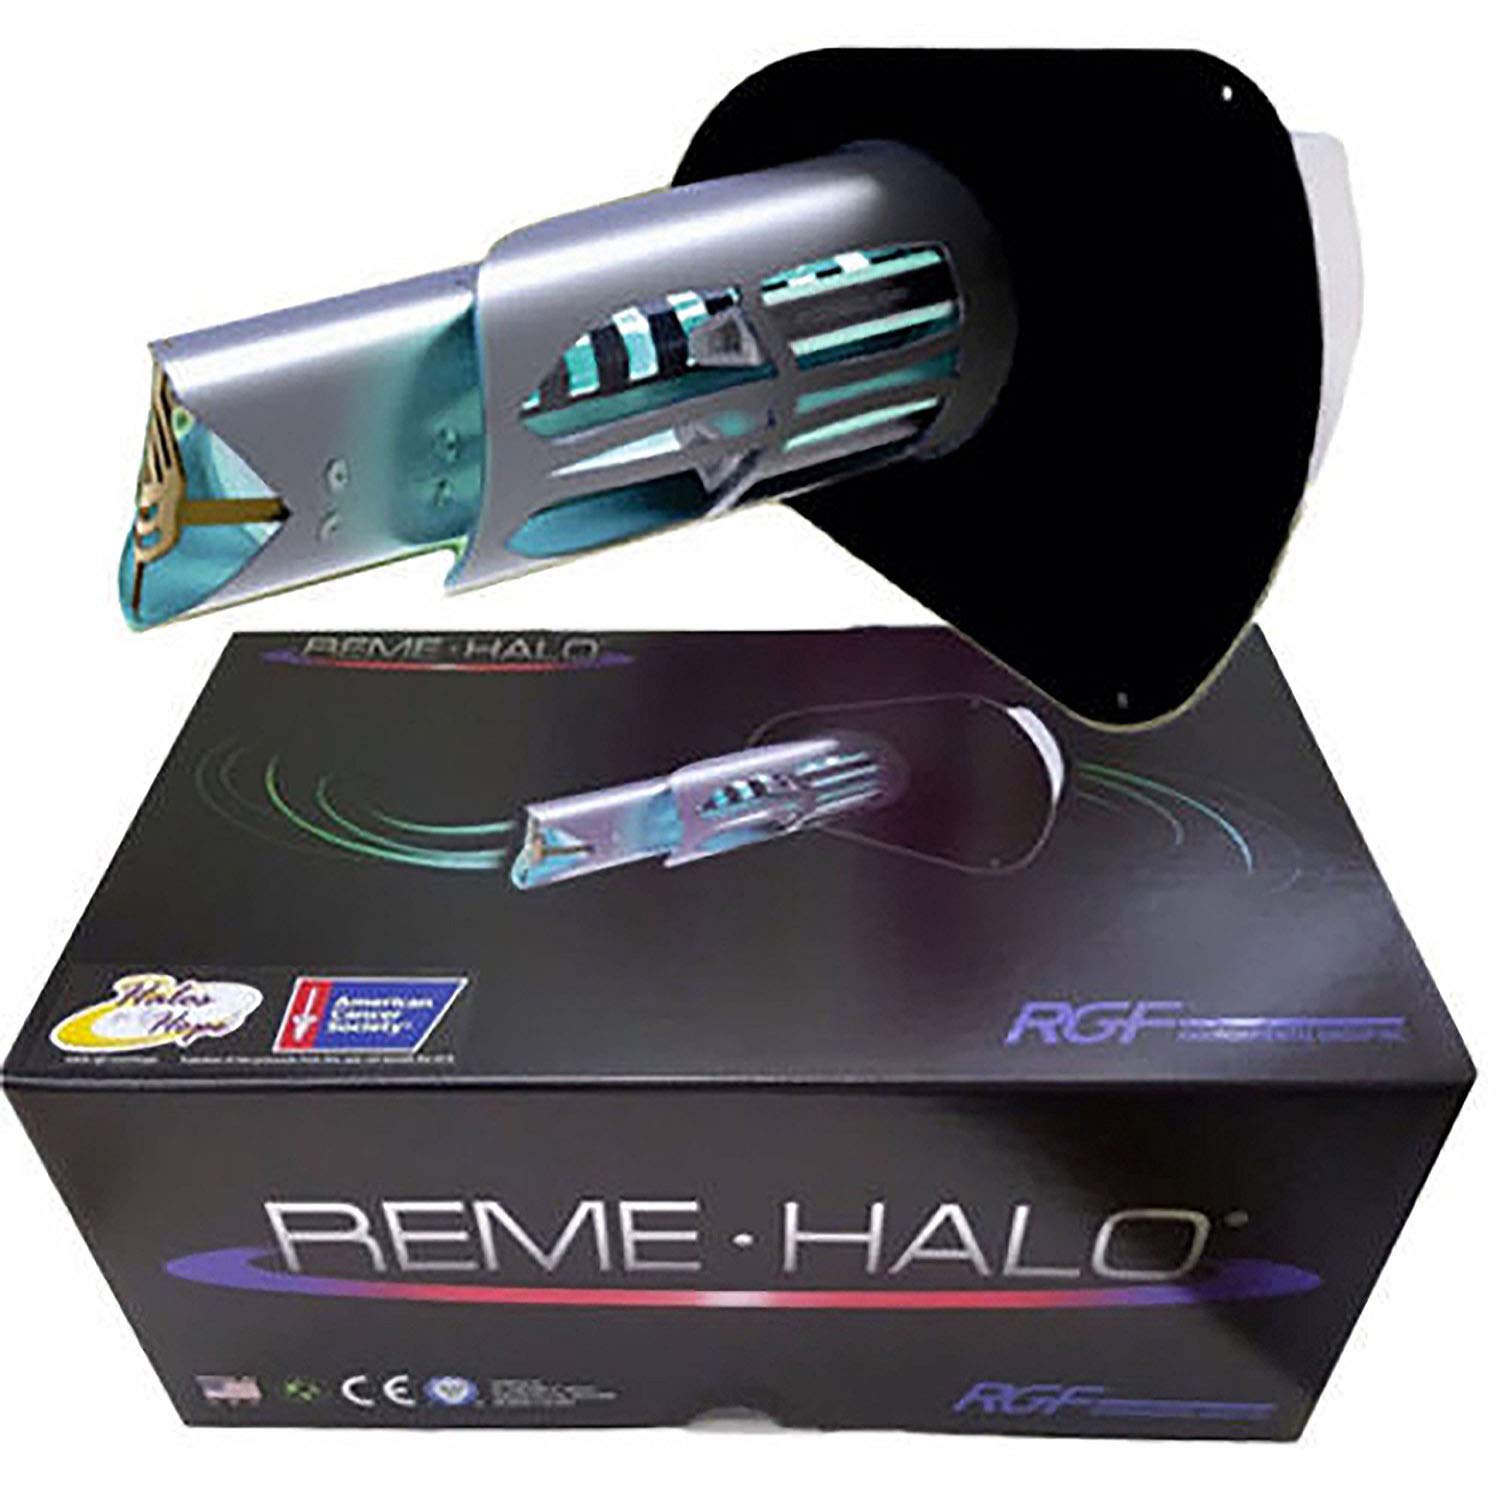 Reme Halo Air Purifier Kills 99% of airborn and surface bacteria in your home